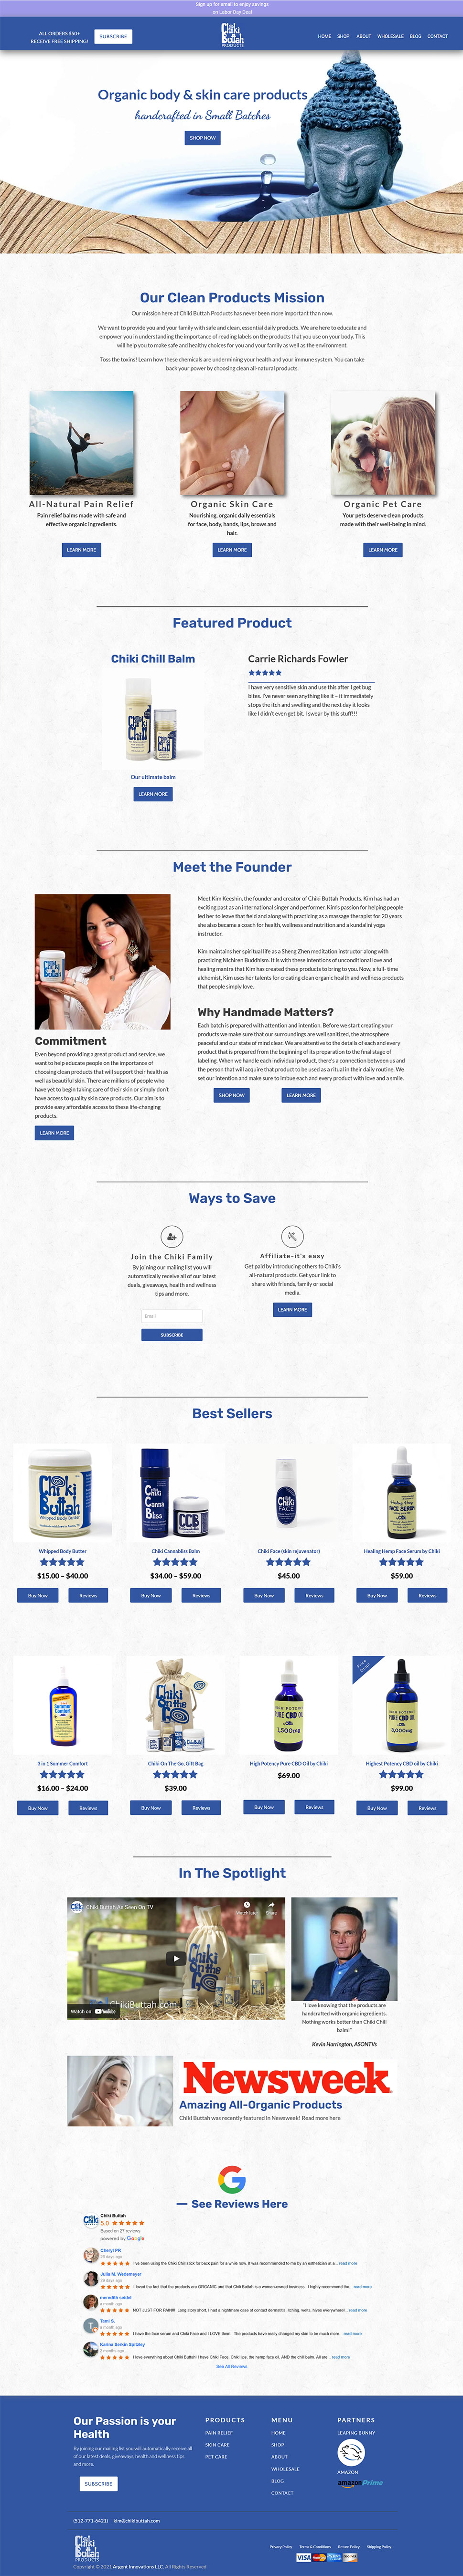 Portfolio - Chiki Products (Full Page View)